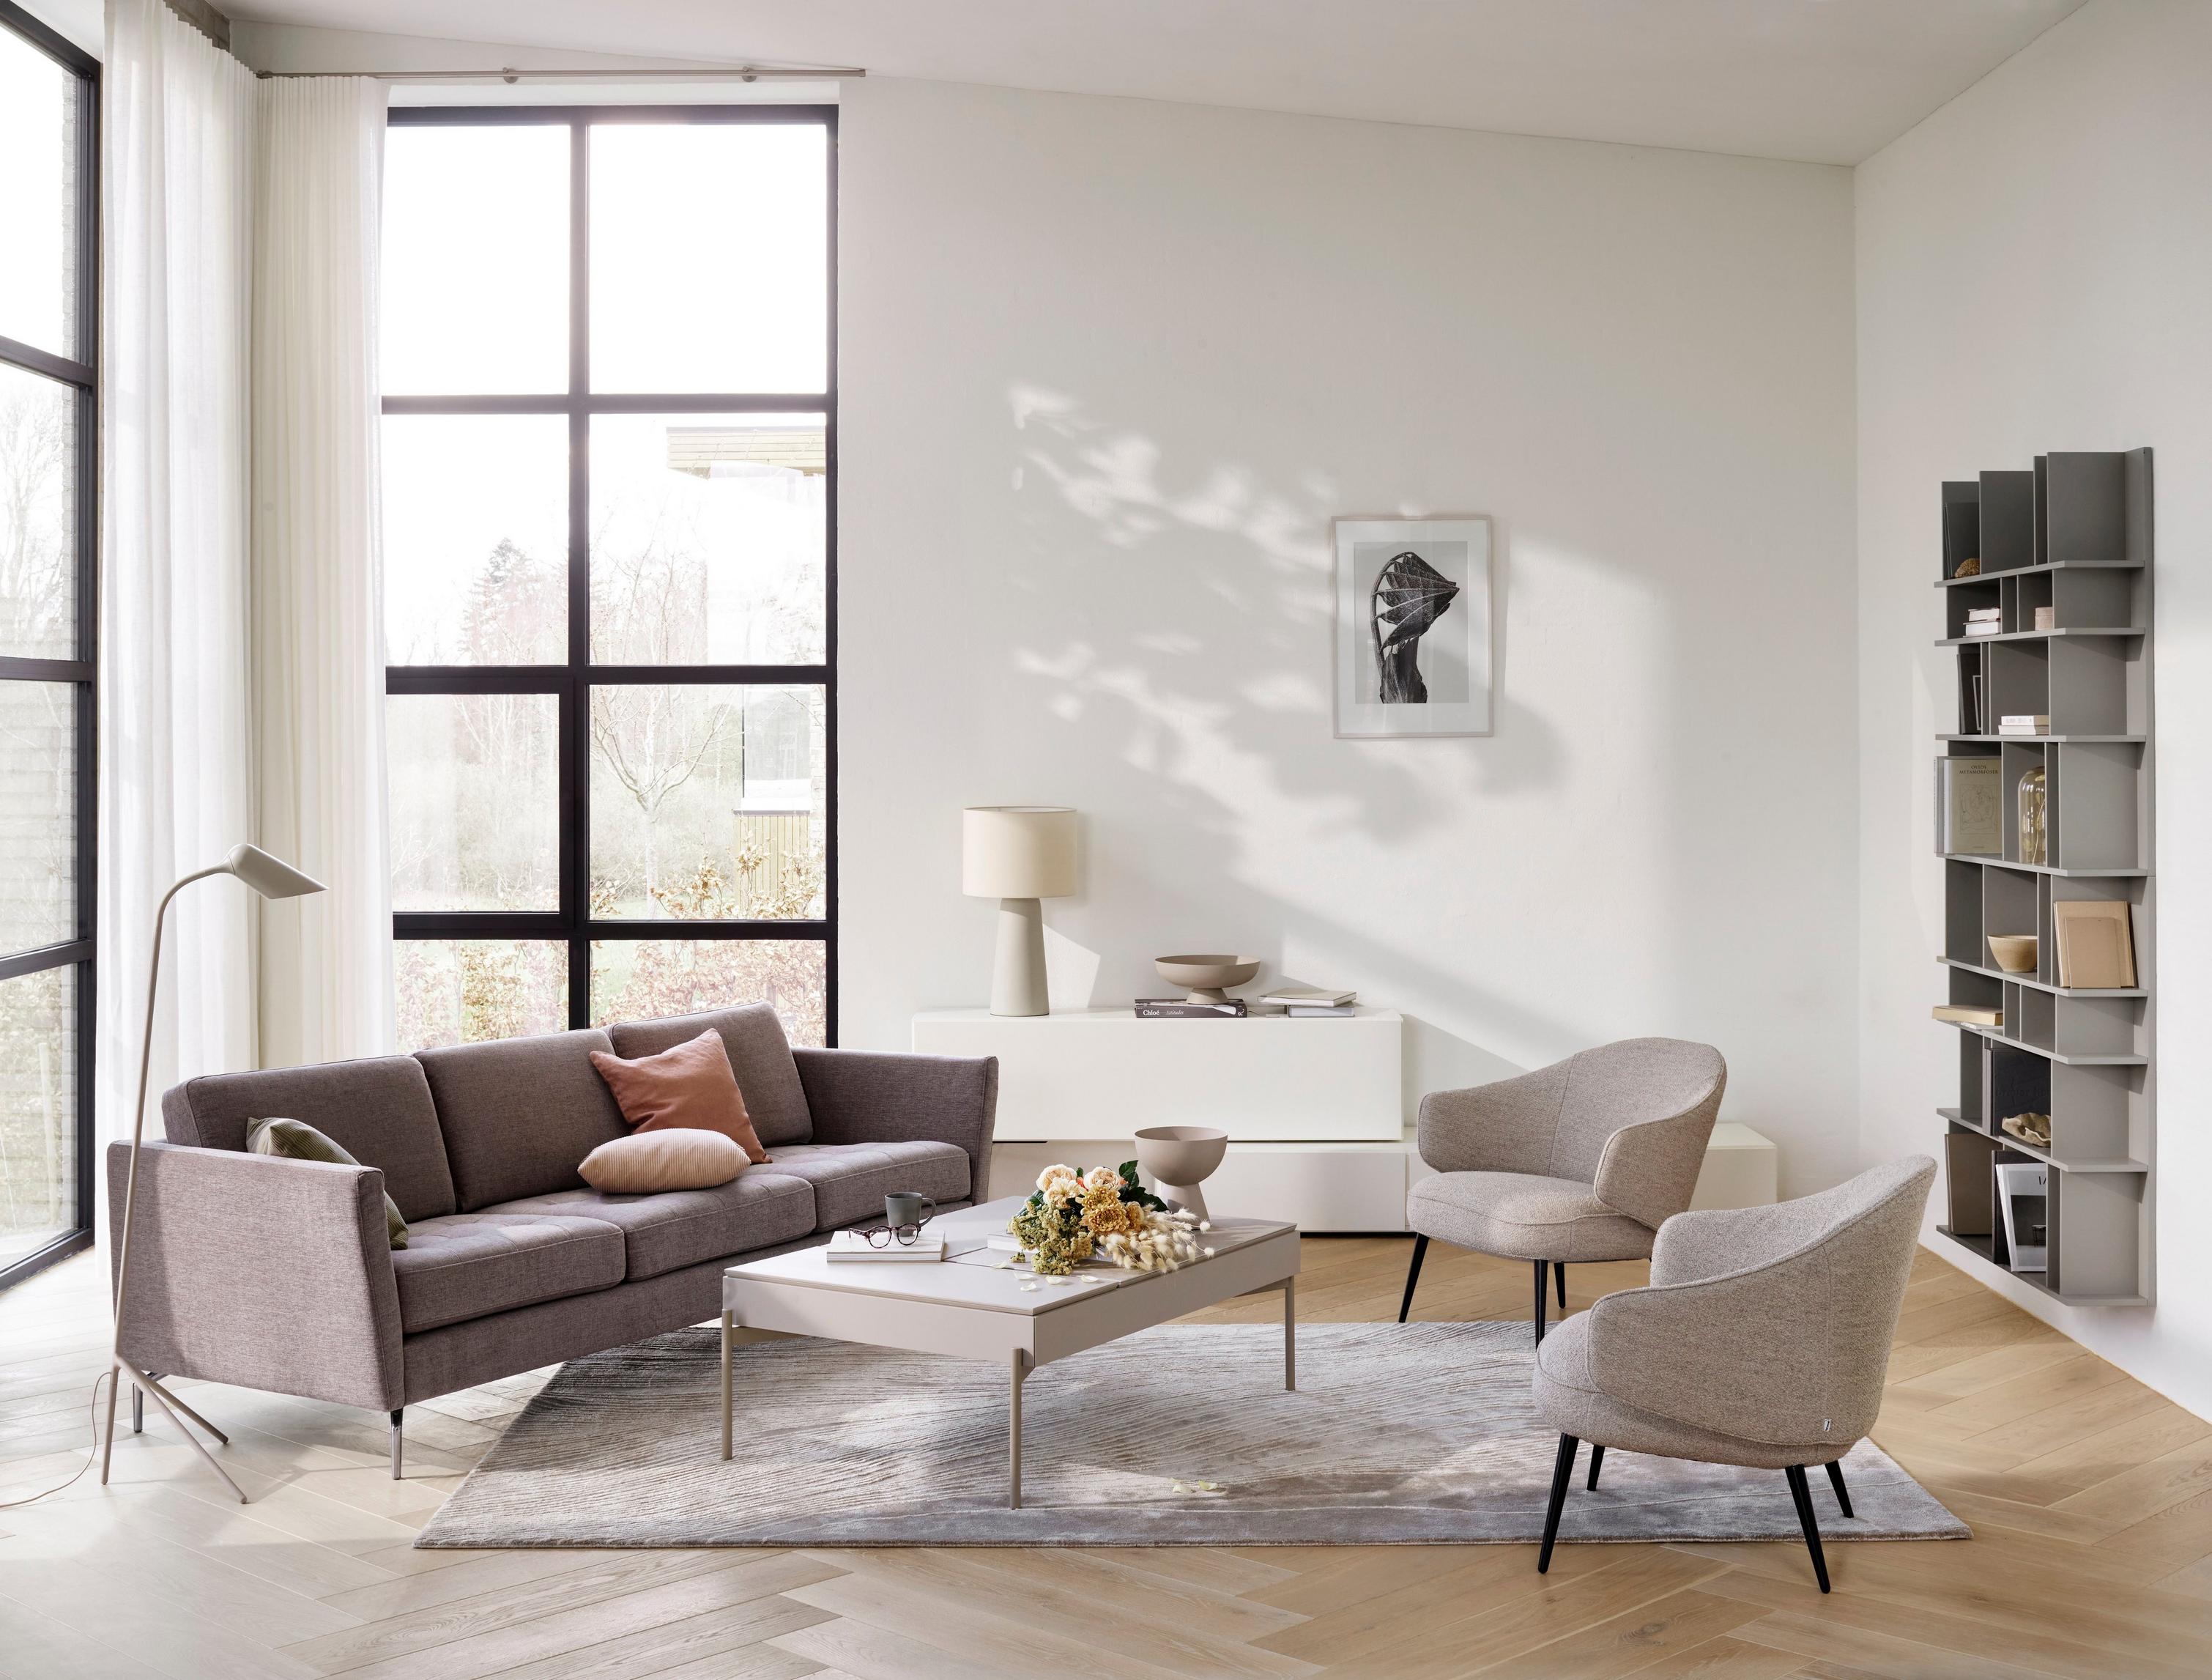 Osaka sofa with its tufted seats in a gray Tomelilla fabric with the Chiva coffee table with storage.